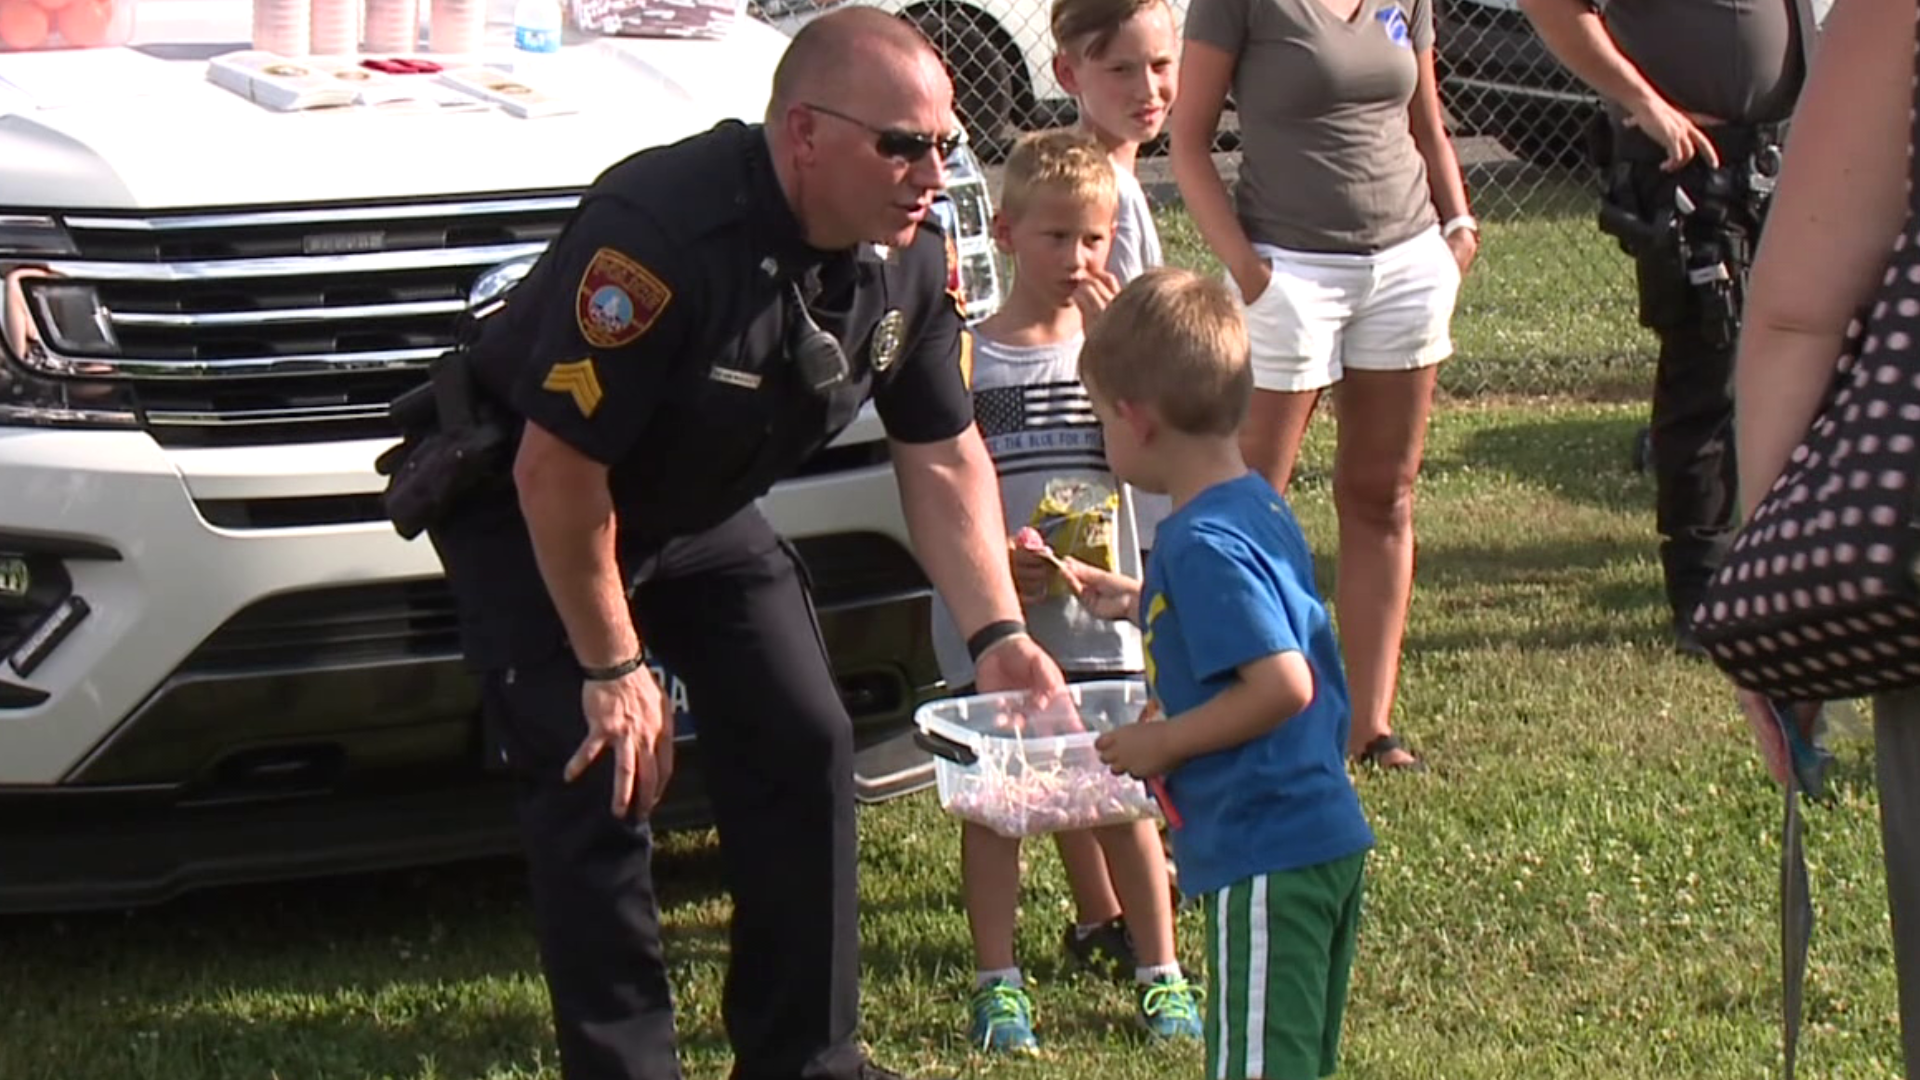 Nine different law enforcement agencies from Luzerne and Columbia counties spoke with children, allowing them to feel more comfortable around police.